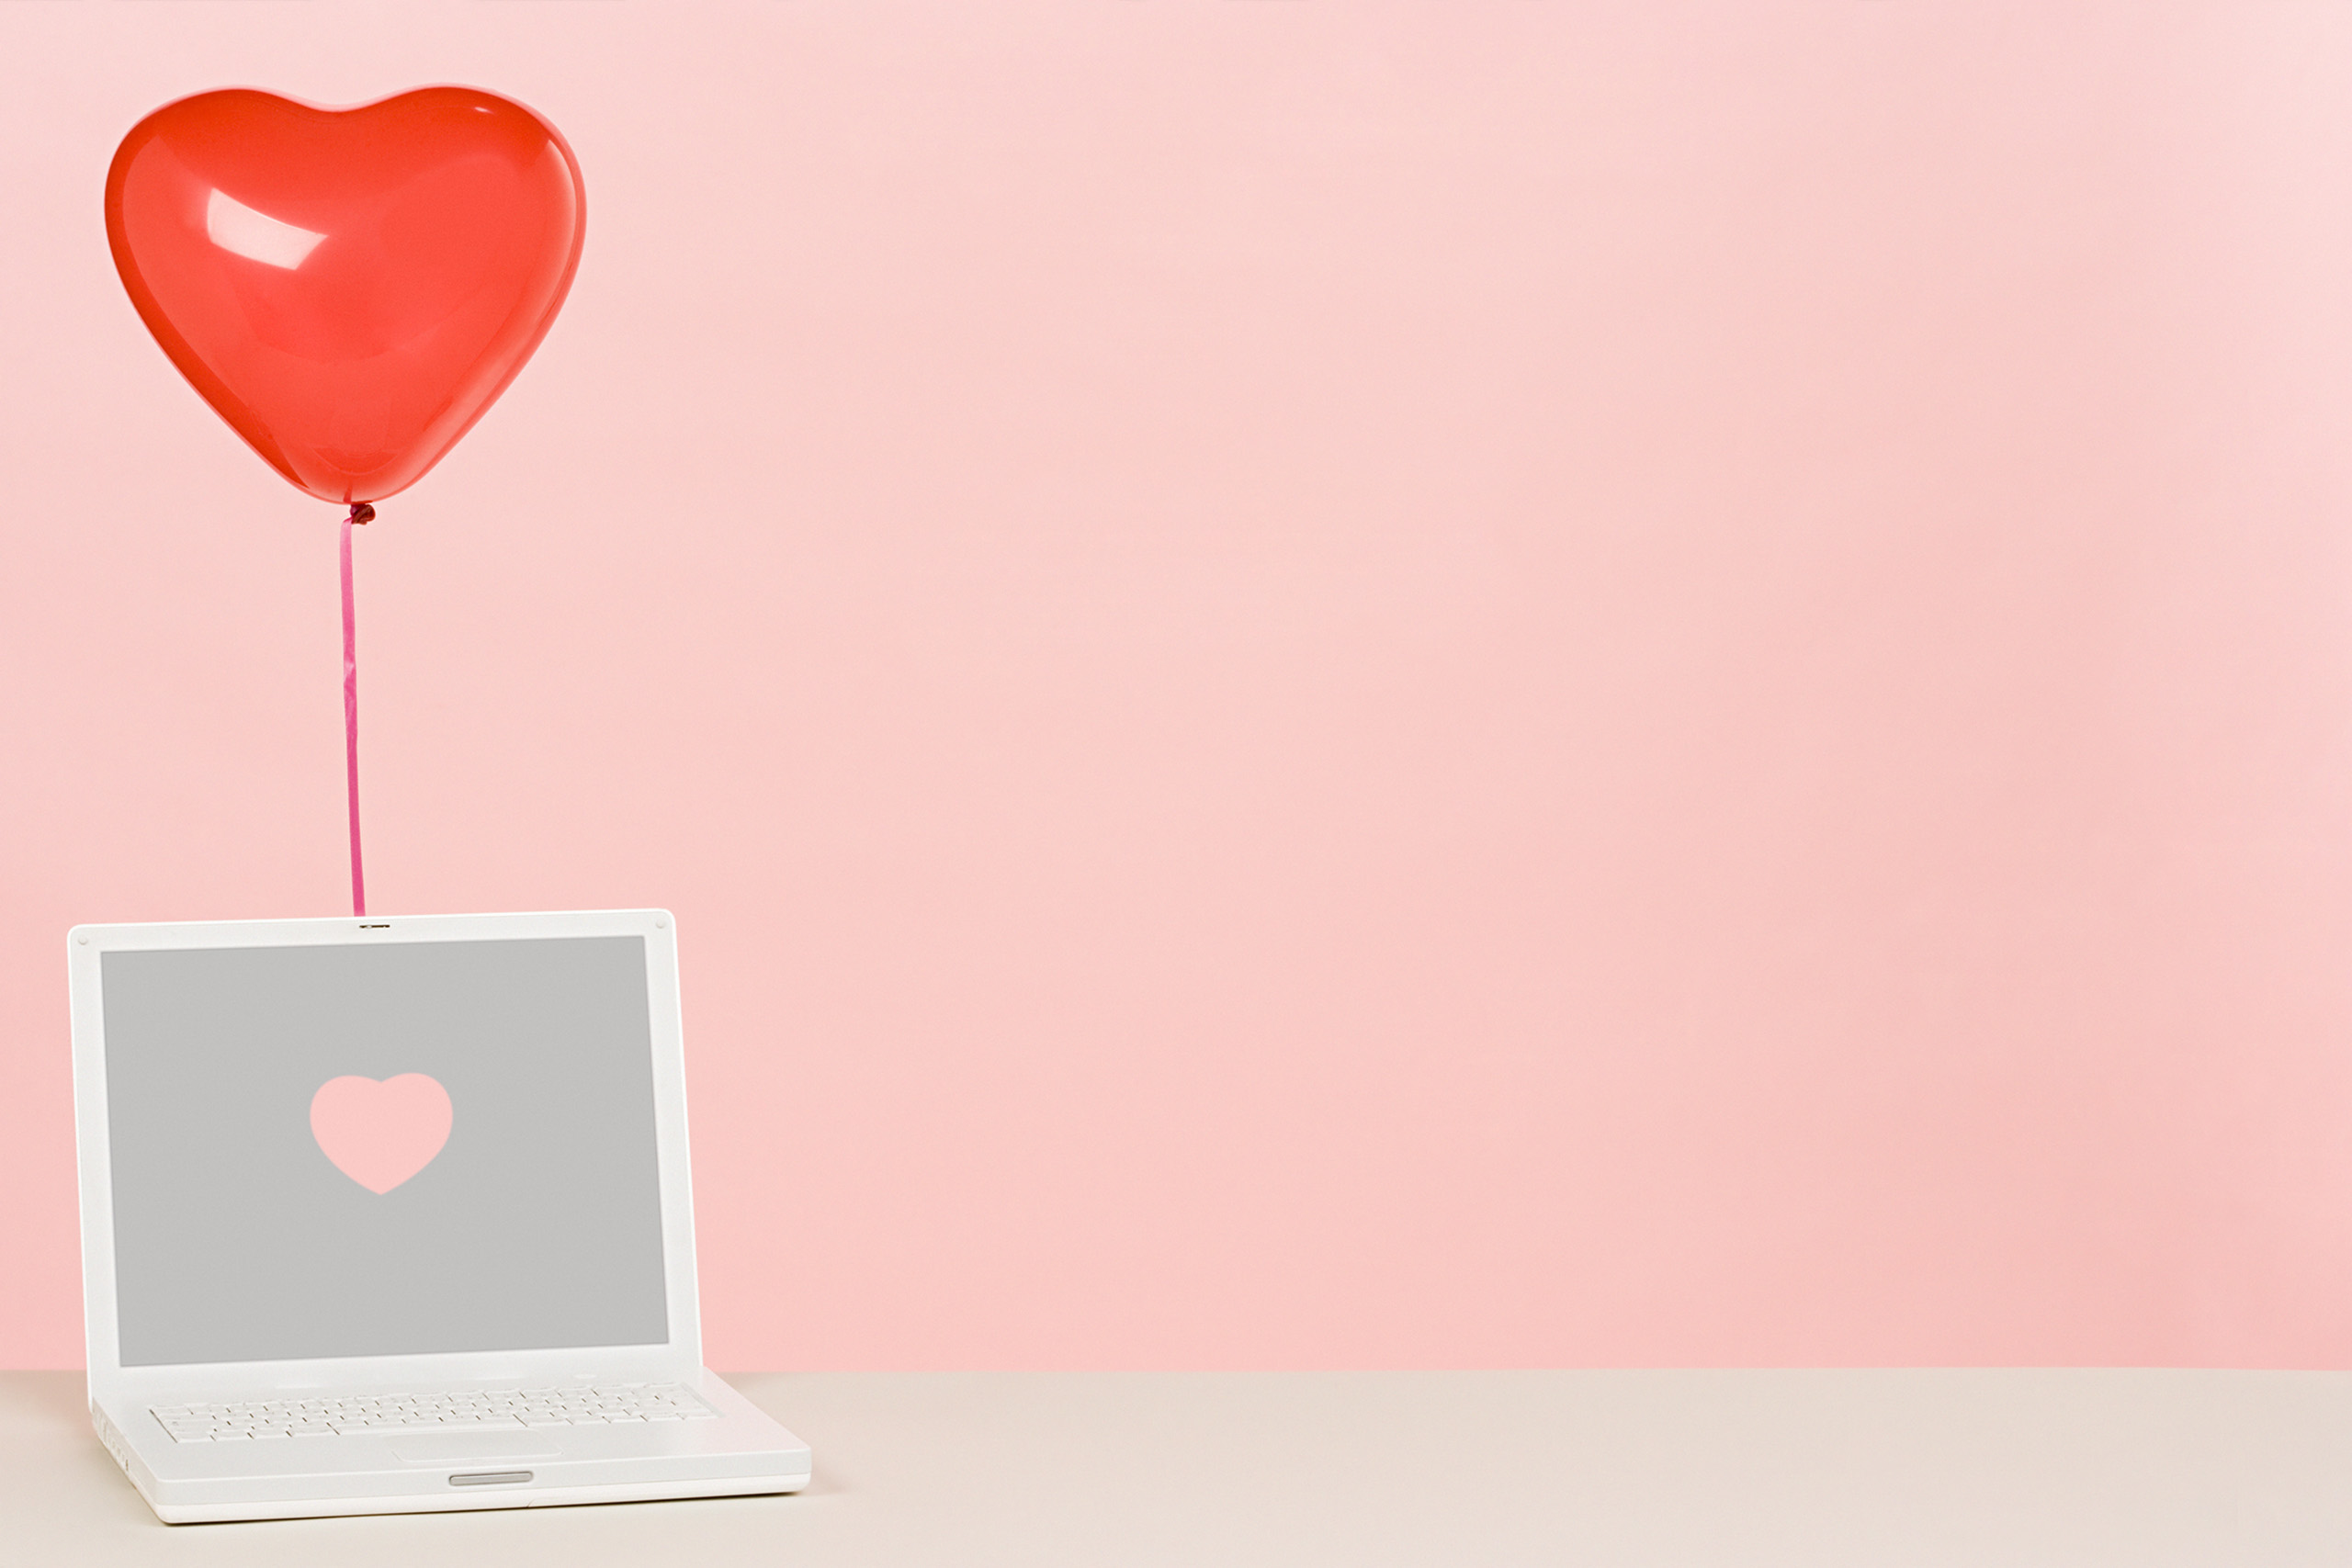 Balloon and laptop (Image Source&mdash;Getty Images)